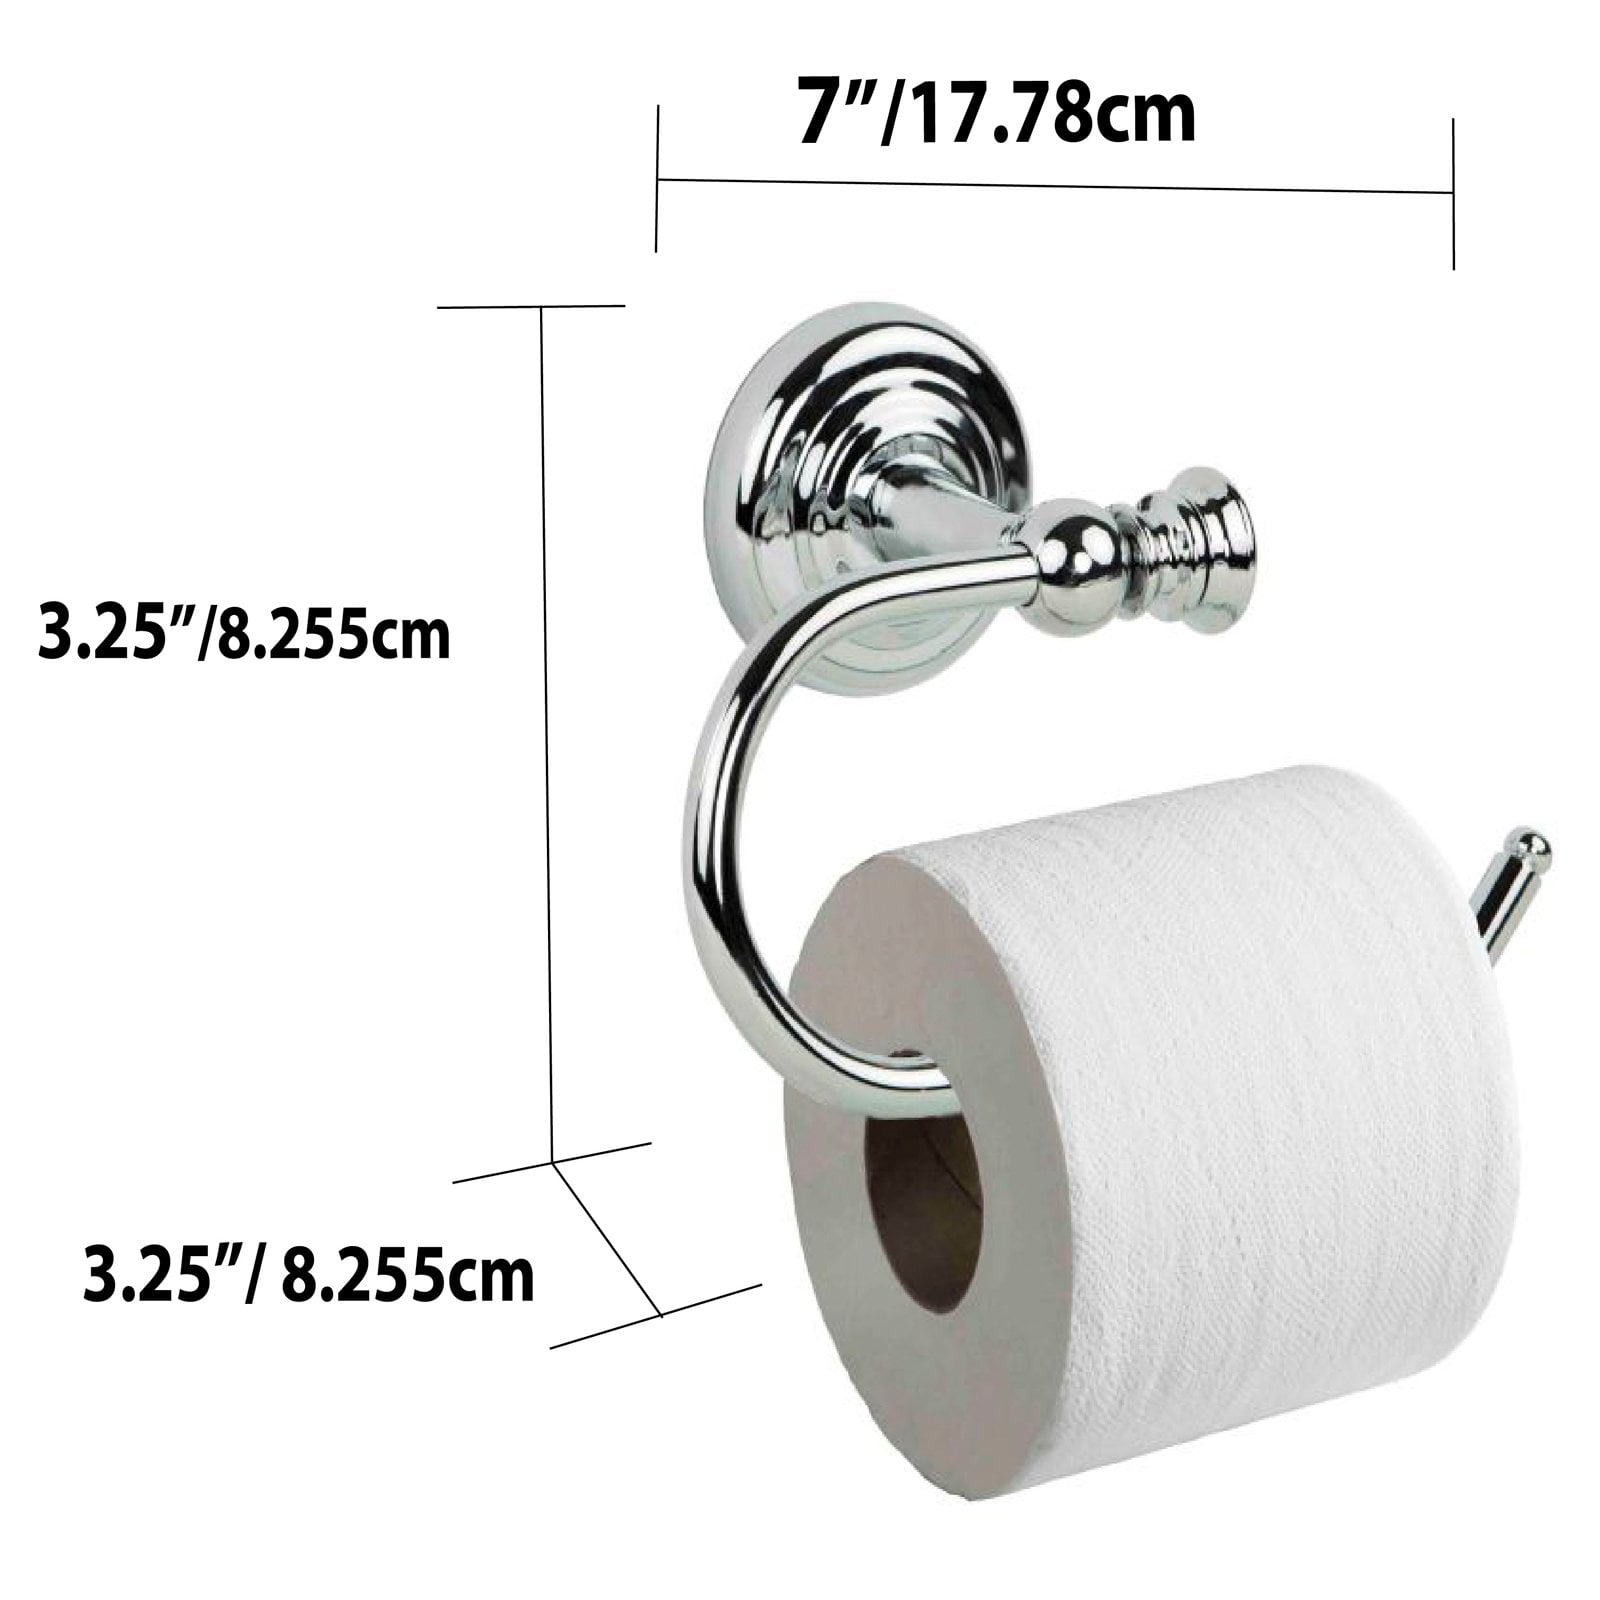 Compactor TPU ABS Chromium-Plated Steel and Bamboo Toilet Paper Roll and Small Towel Holder